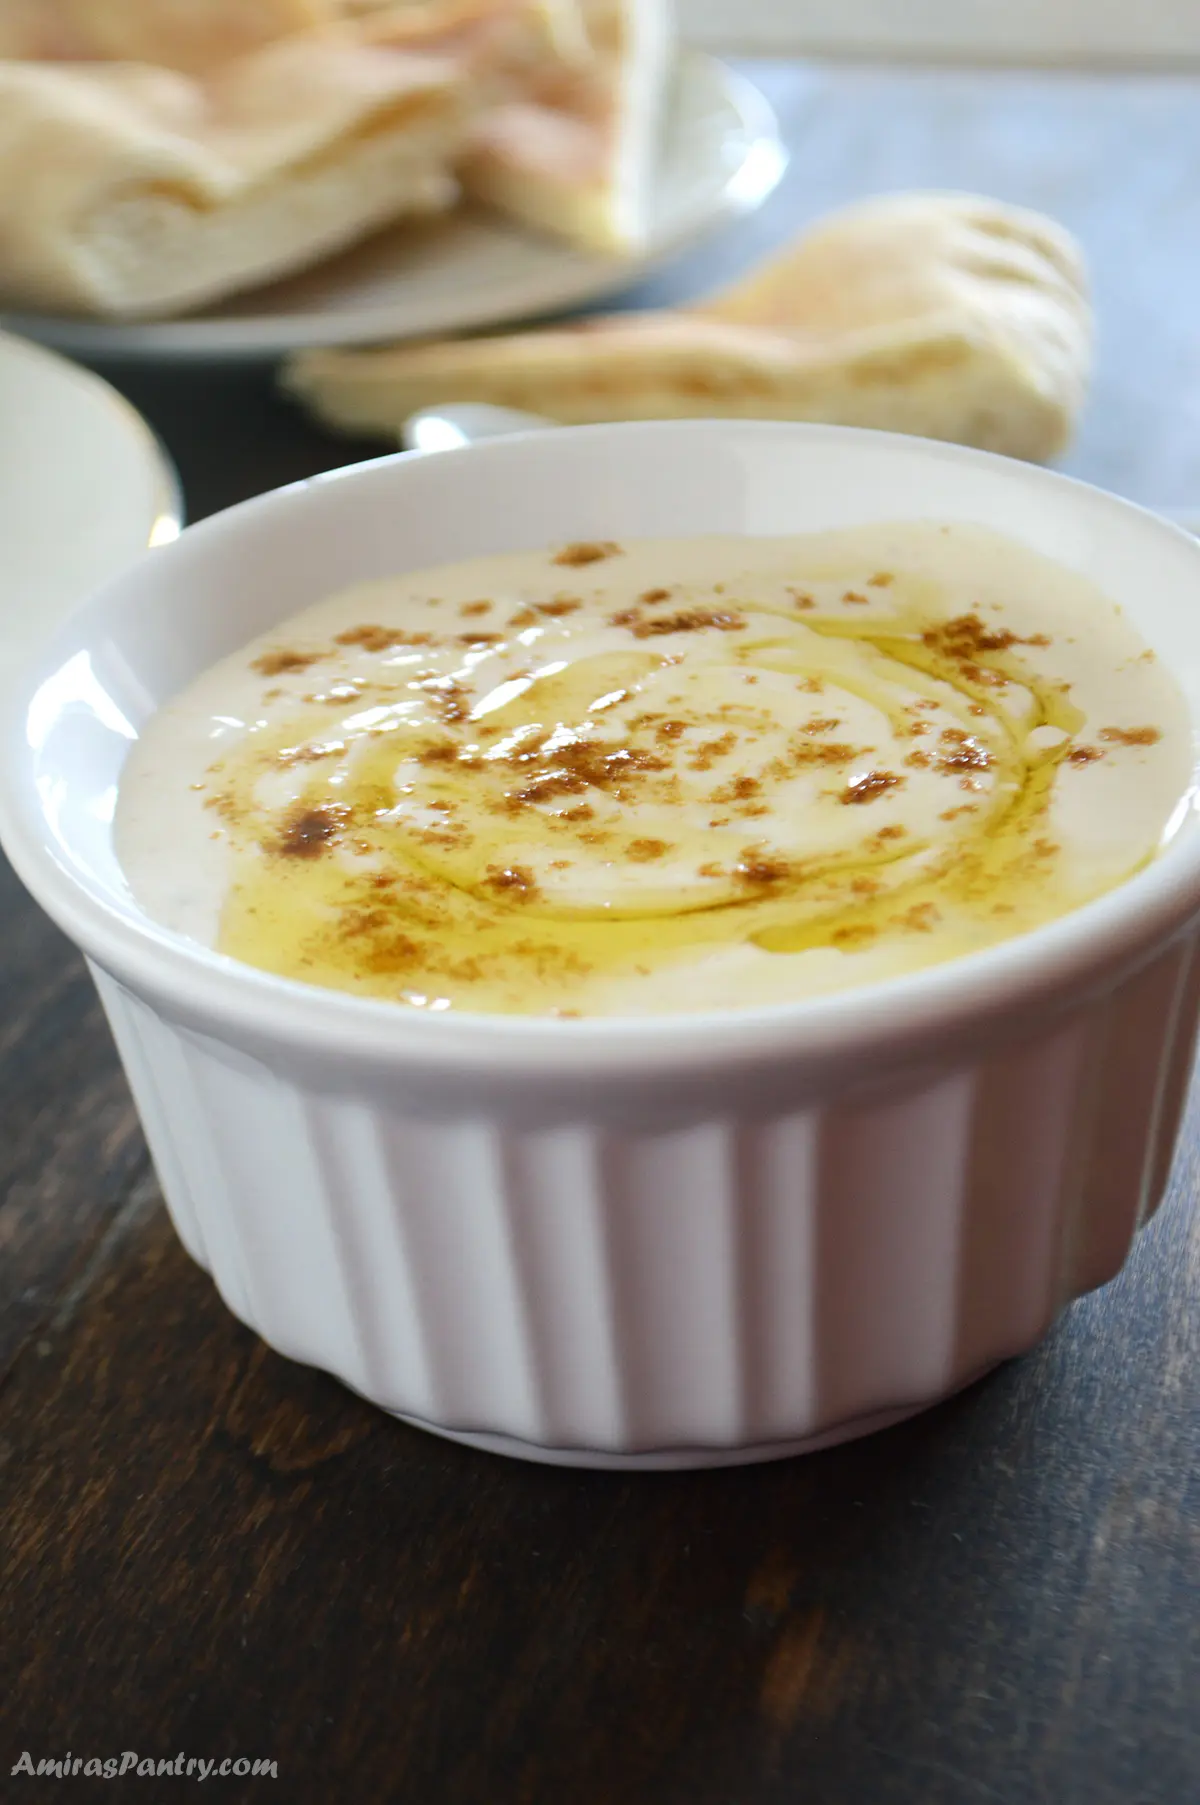 Tahini sauce in a small white bowl.